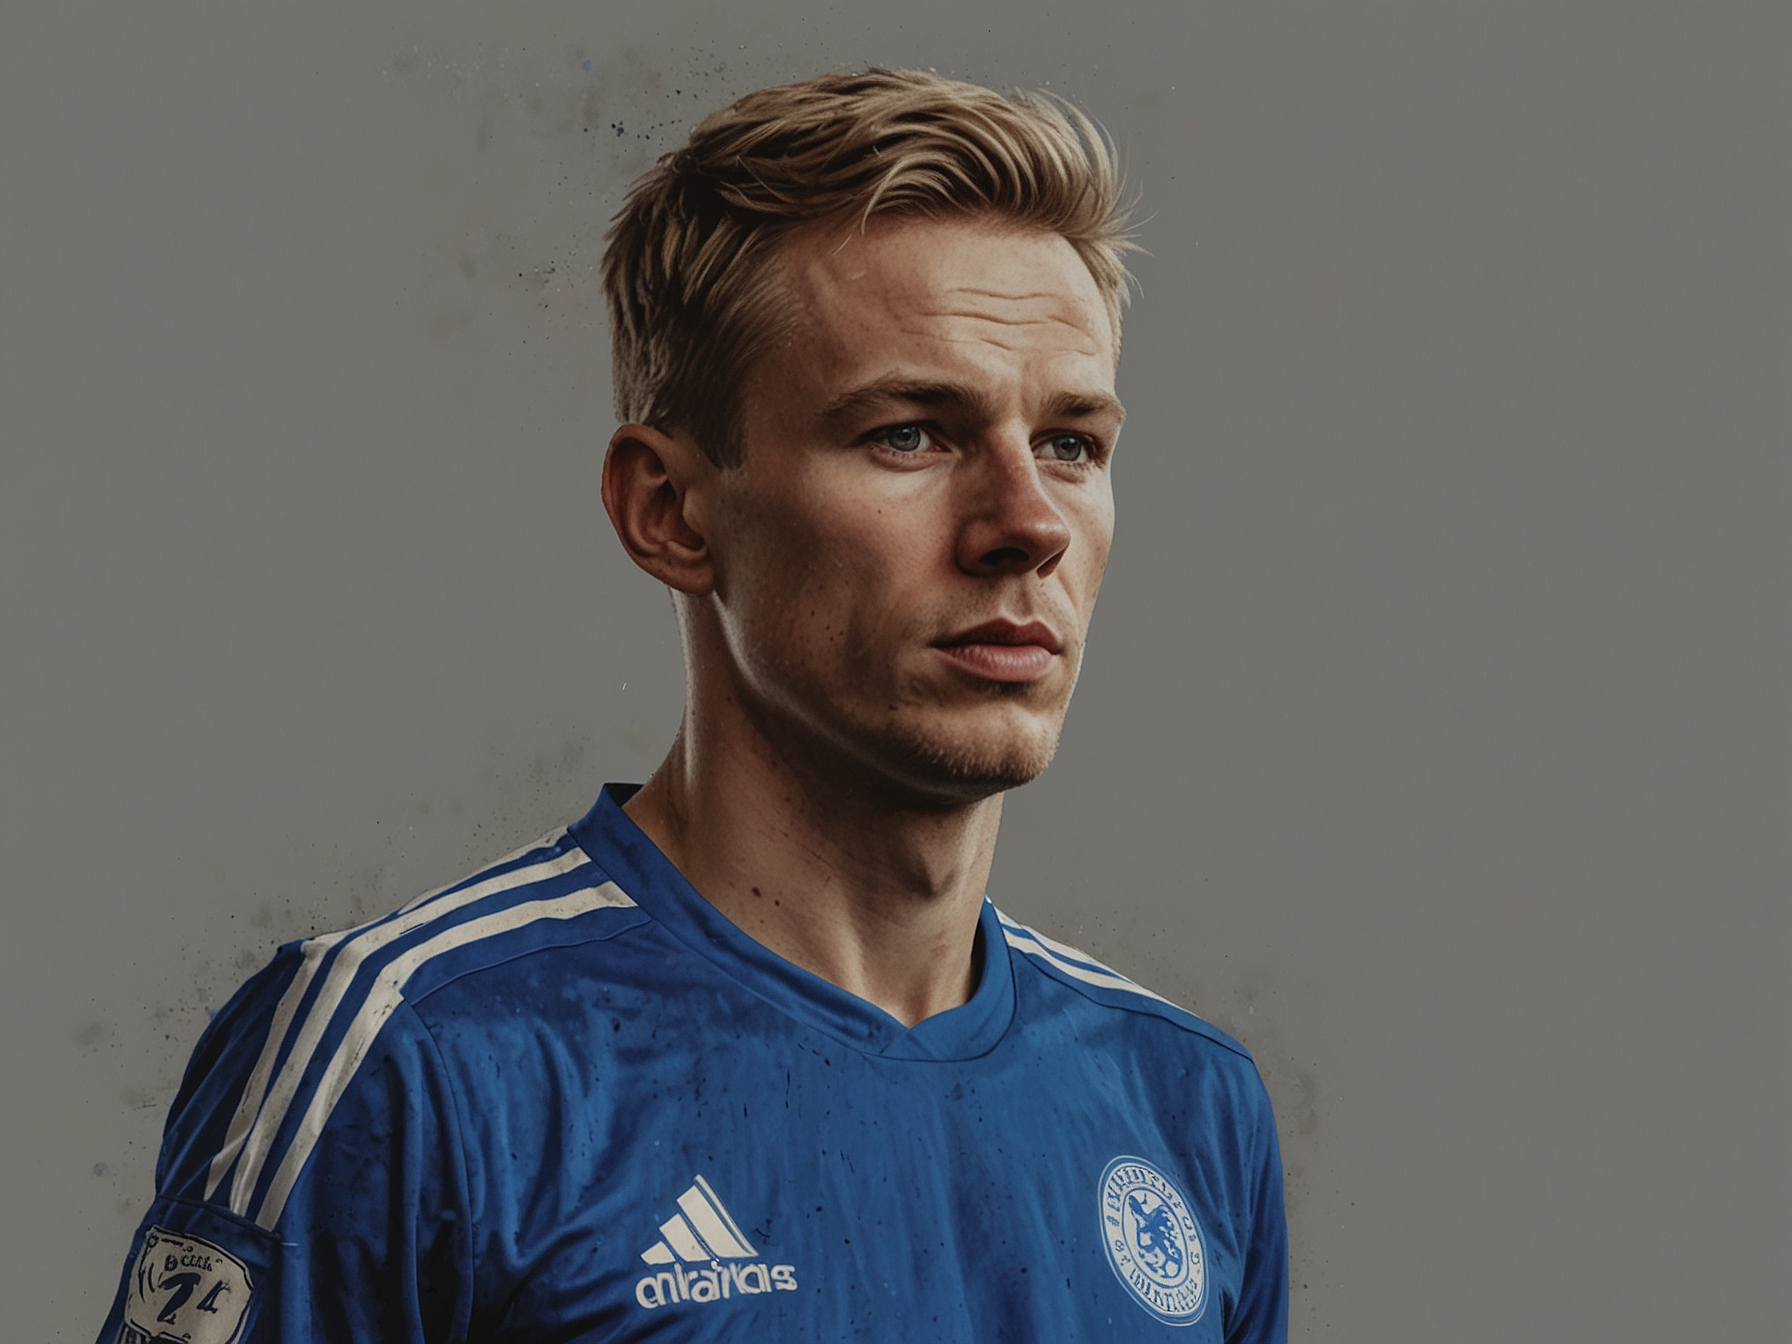 Kiernan Dewsbury-Hall in a Leicester City jersey, showcasing his skills in midfield. His dynamic style and robust performances have made him a standout player in the Premier League.